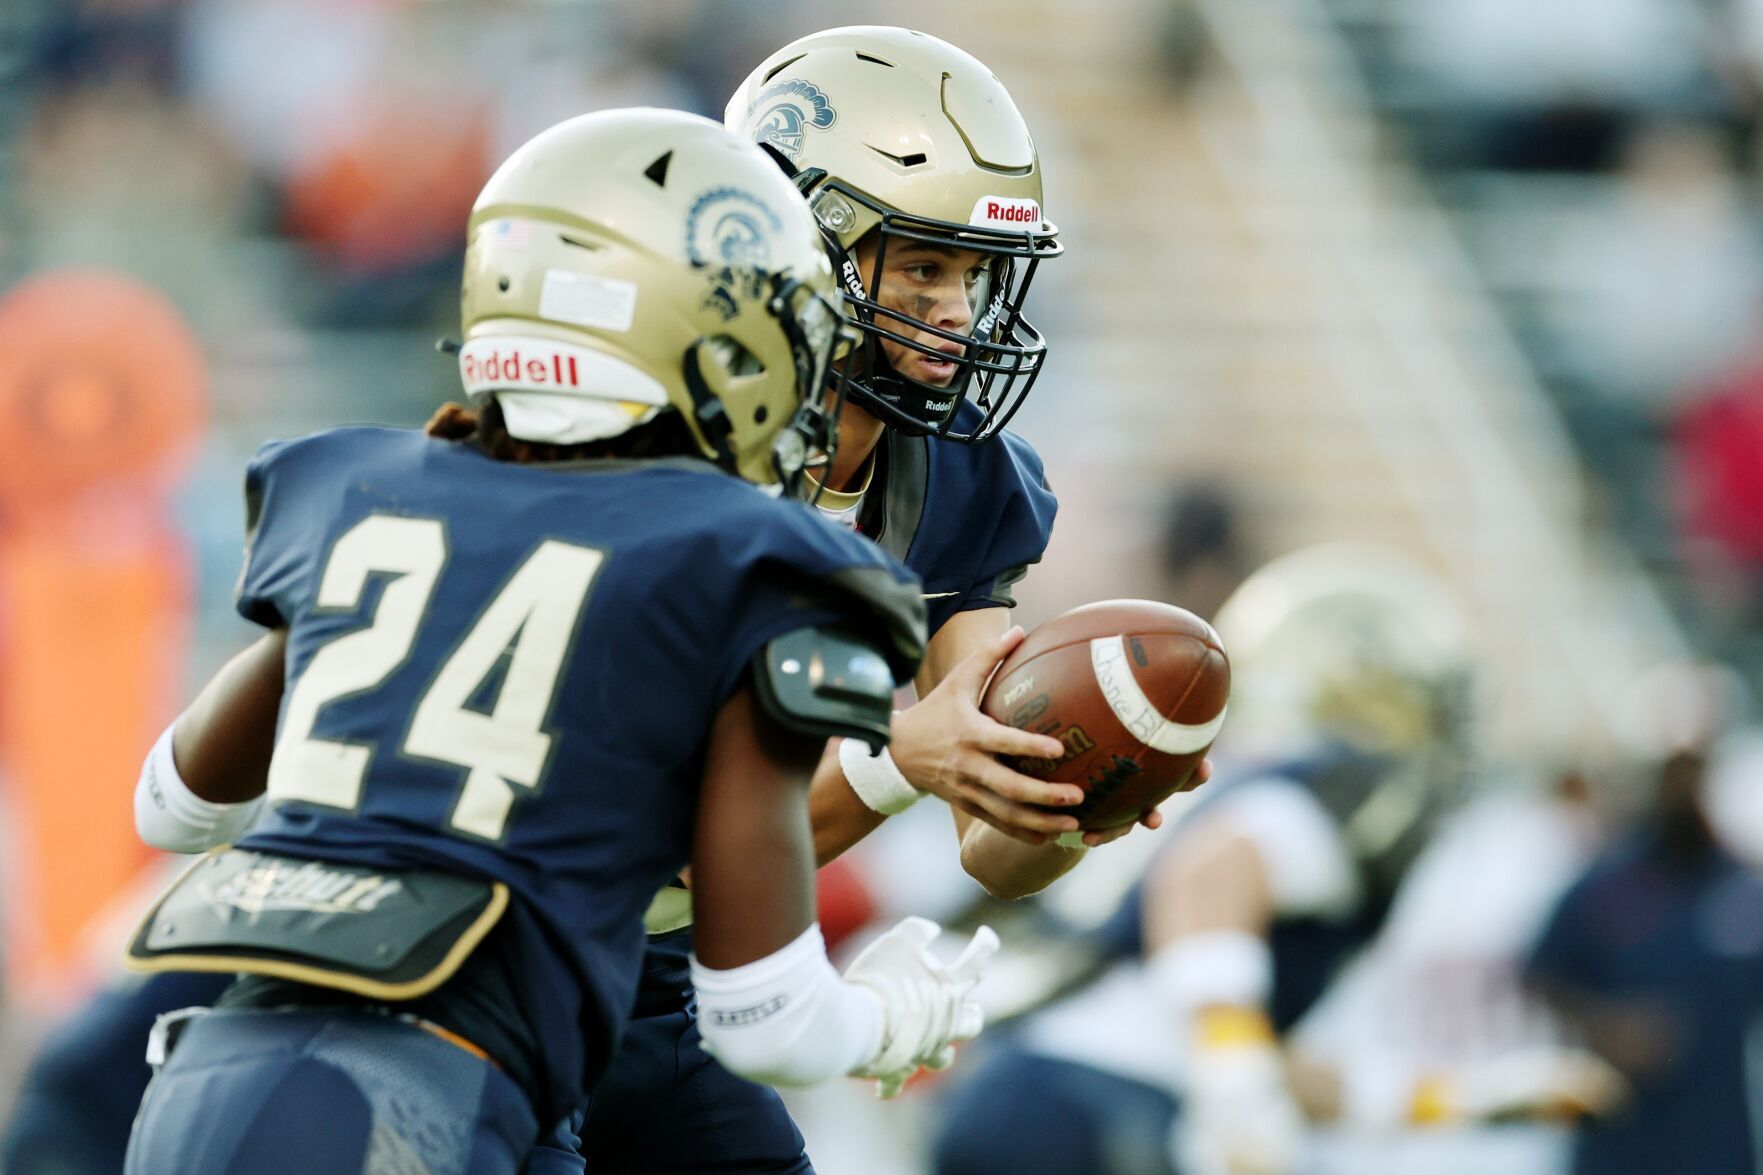 High school football in the 804 area heats up in Week 8 with thrilling matchups featuring top teams and standout players